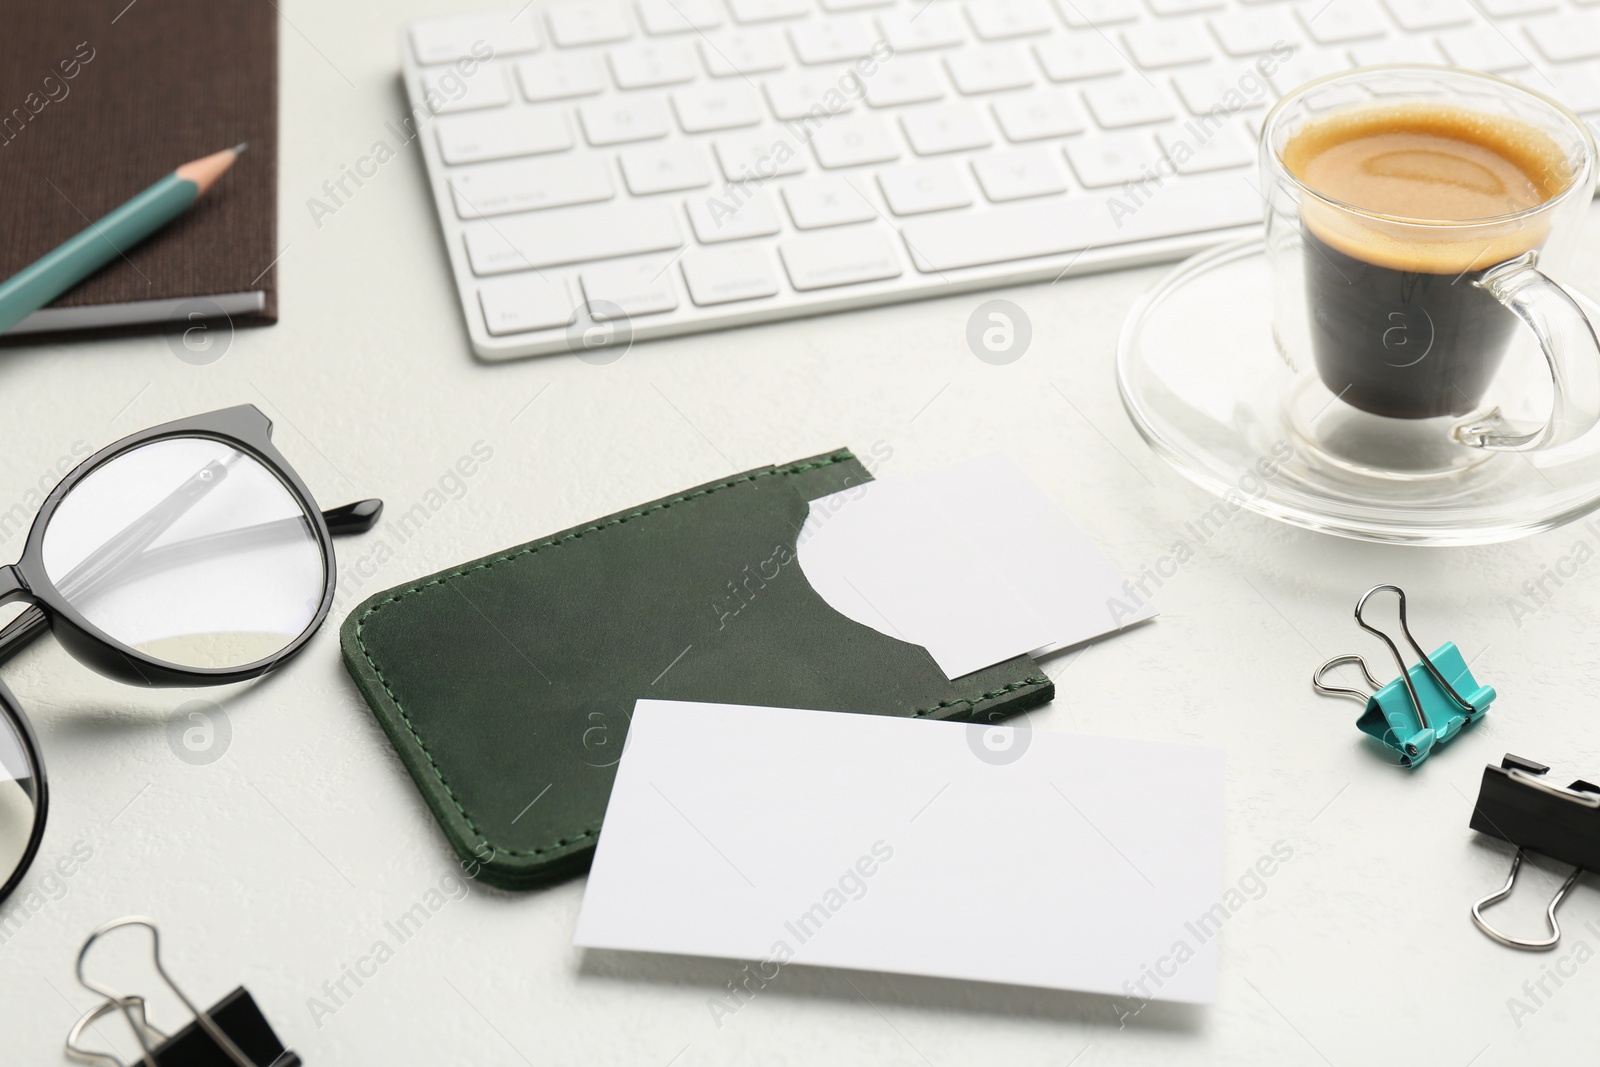 Photo of Leather business card holder with blank cards, glasses, coffee, keyboard and stationery on white table